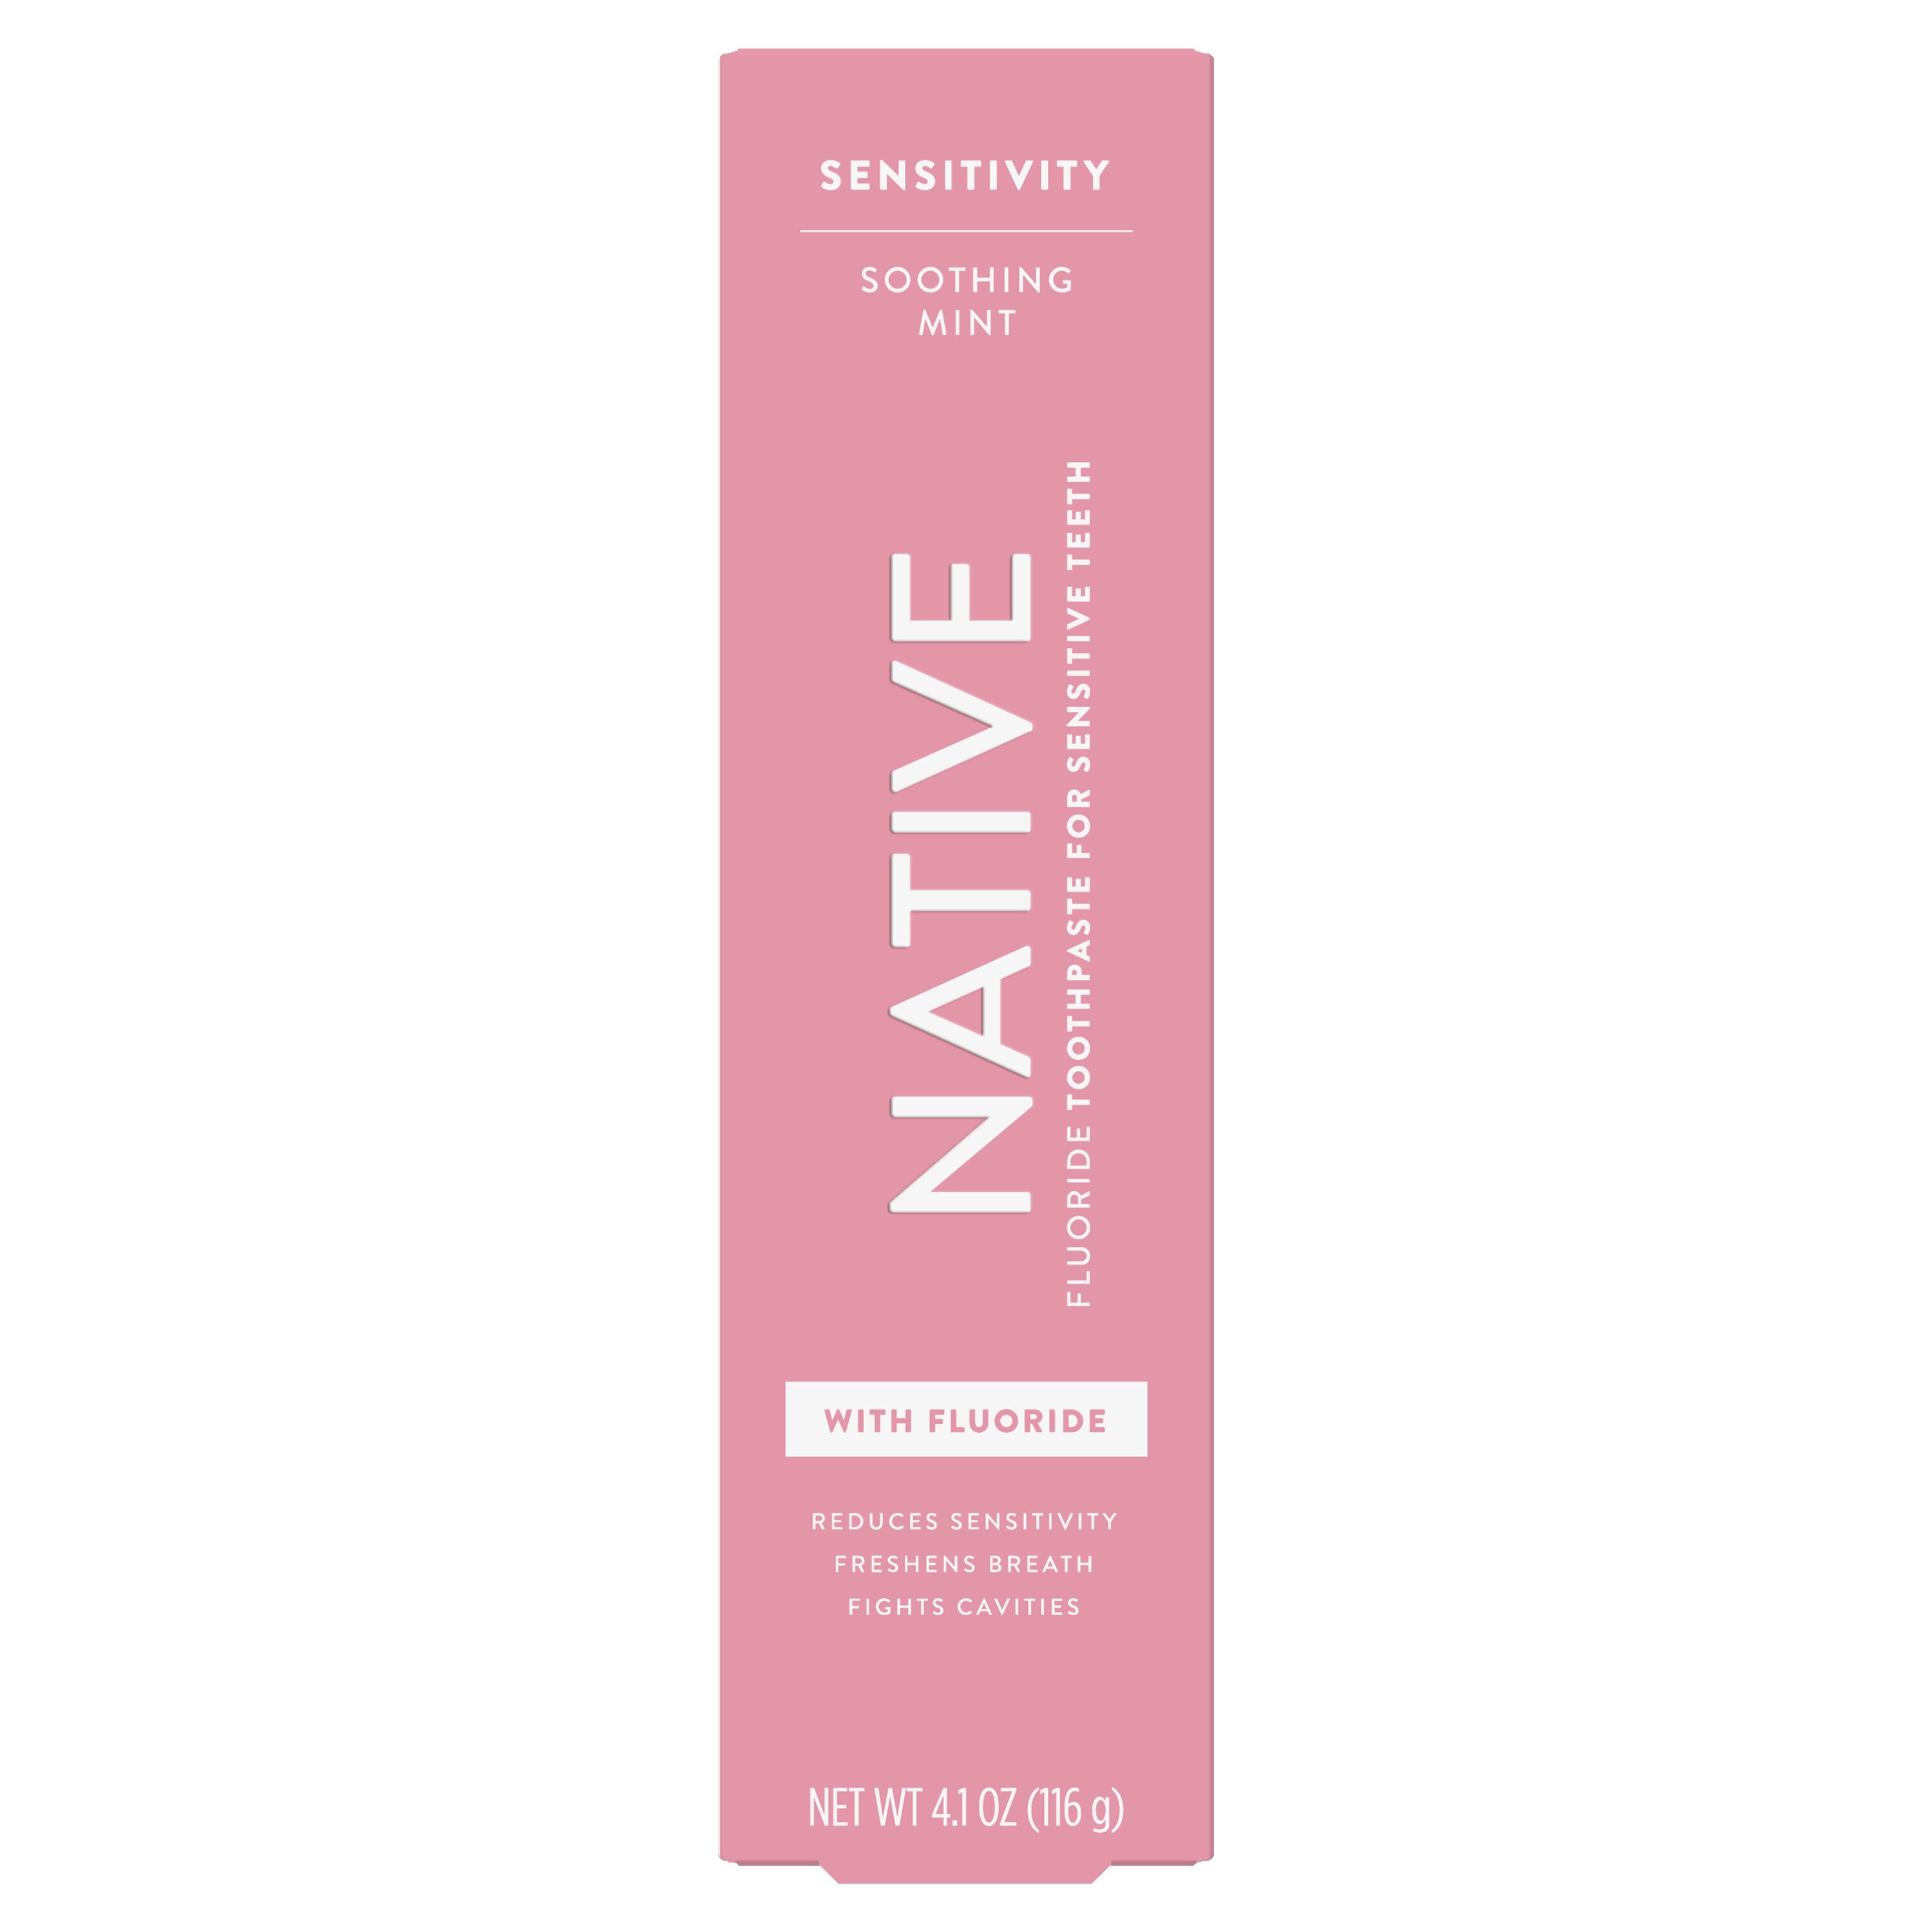 NATIVE Nature Fluoride Toothpaste For Sensitive Teeth, Soothing Mint, 4.1 Oz , CVS